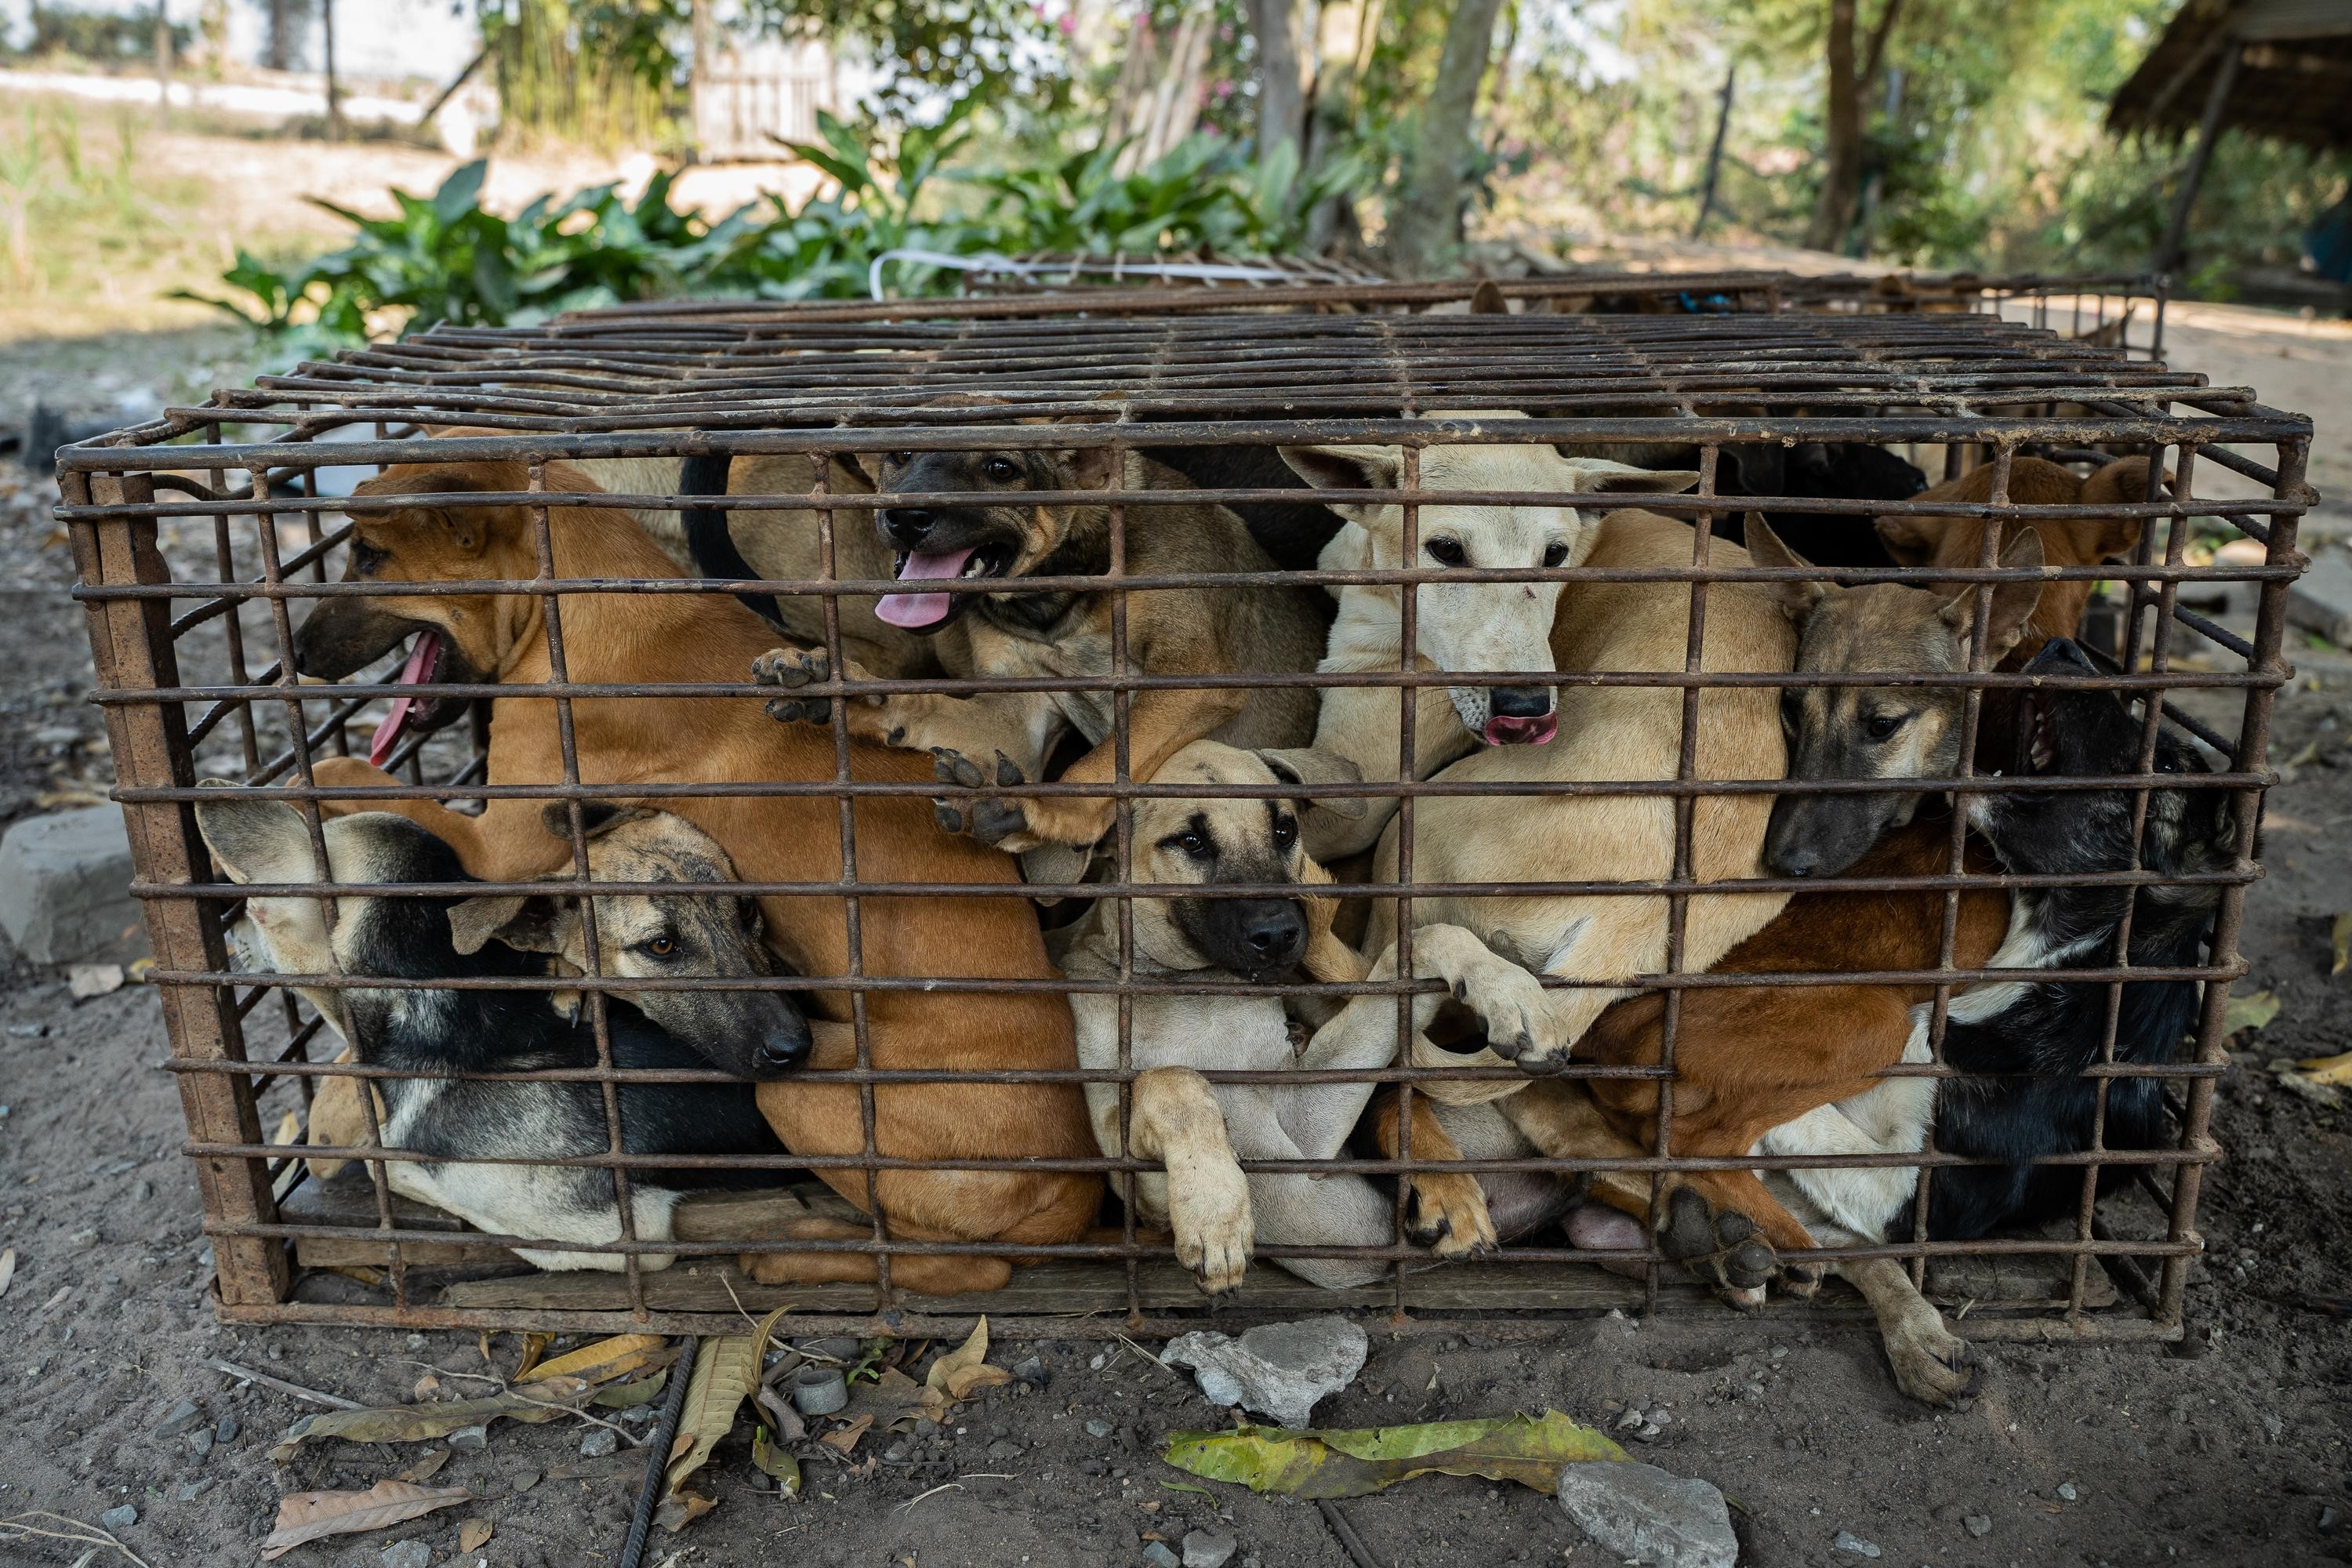 Interception of dogs in Siem Reap Cambodia.